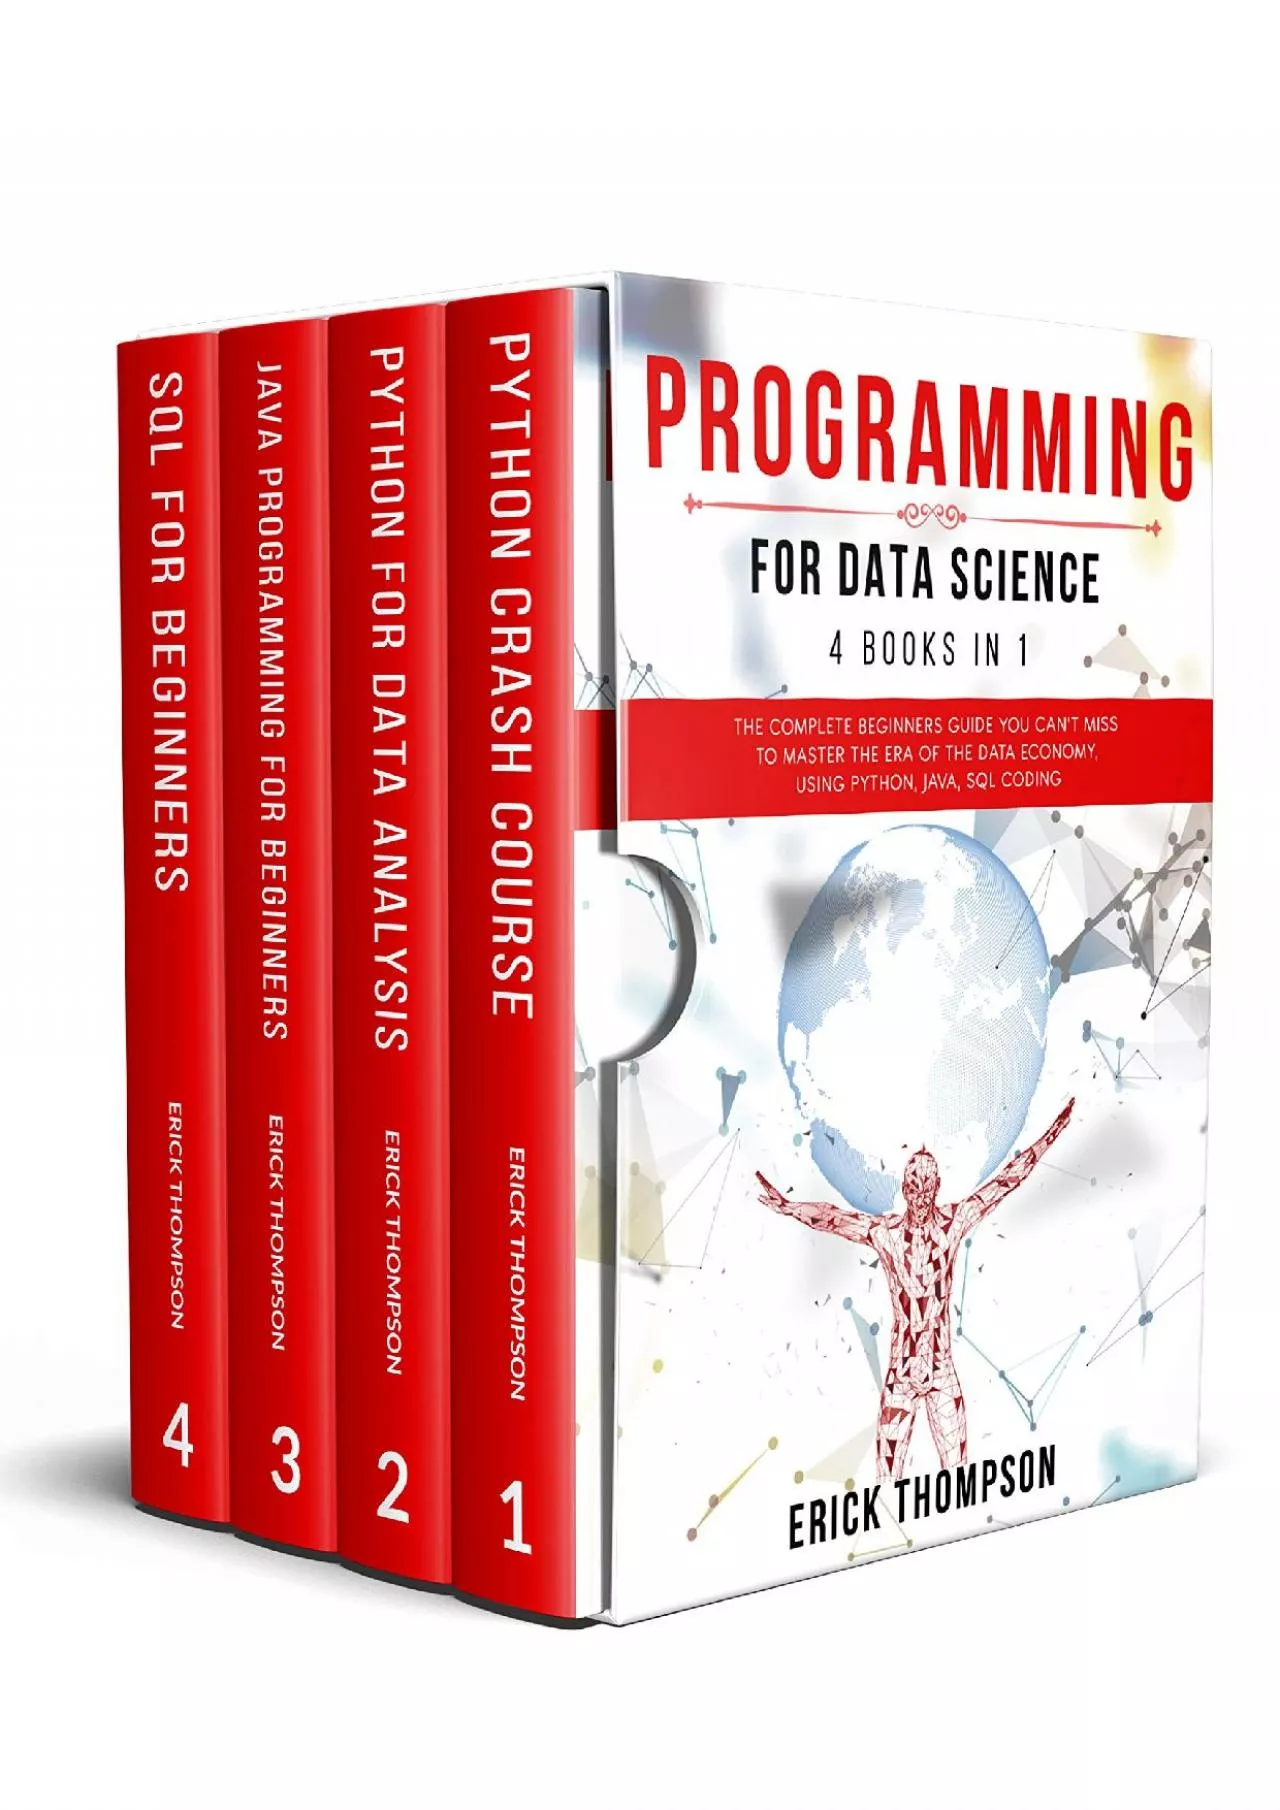 (DOWNLOAD)-Programming for Data Science: 4 Books in 1. The Complete Beginners Guide you